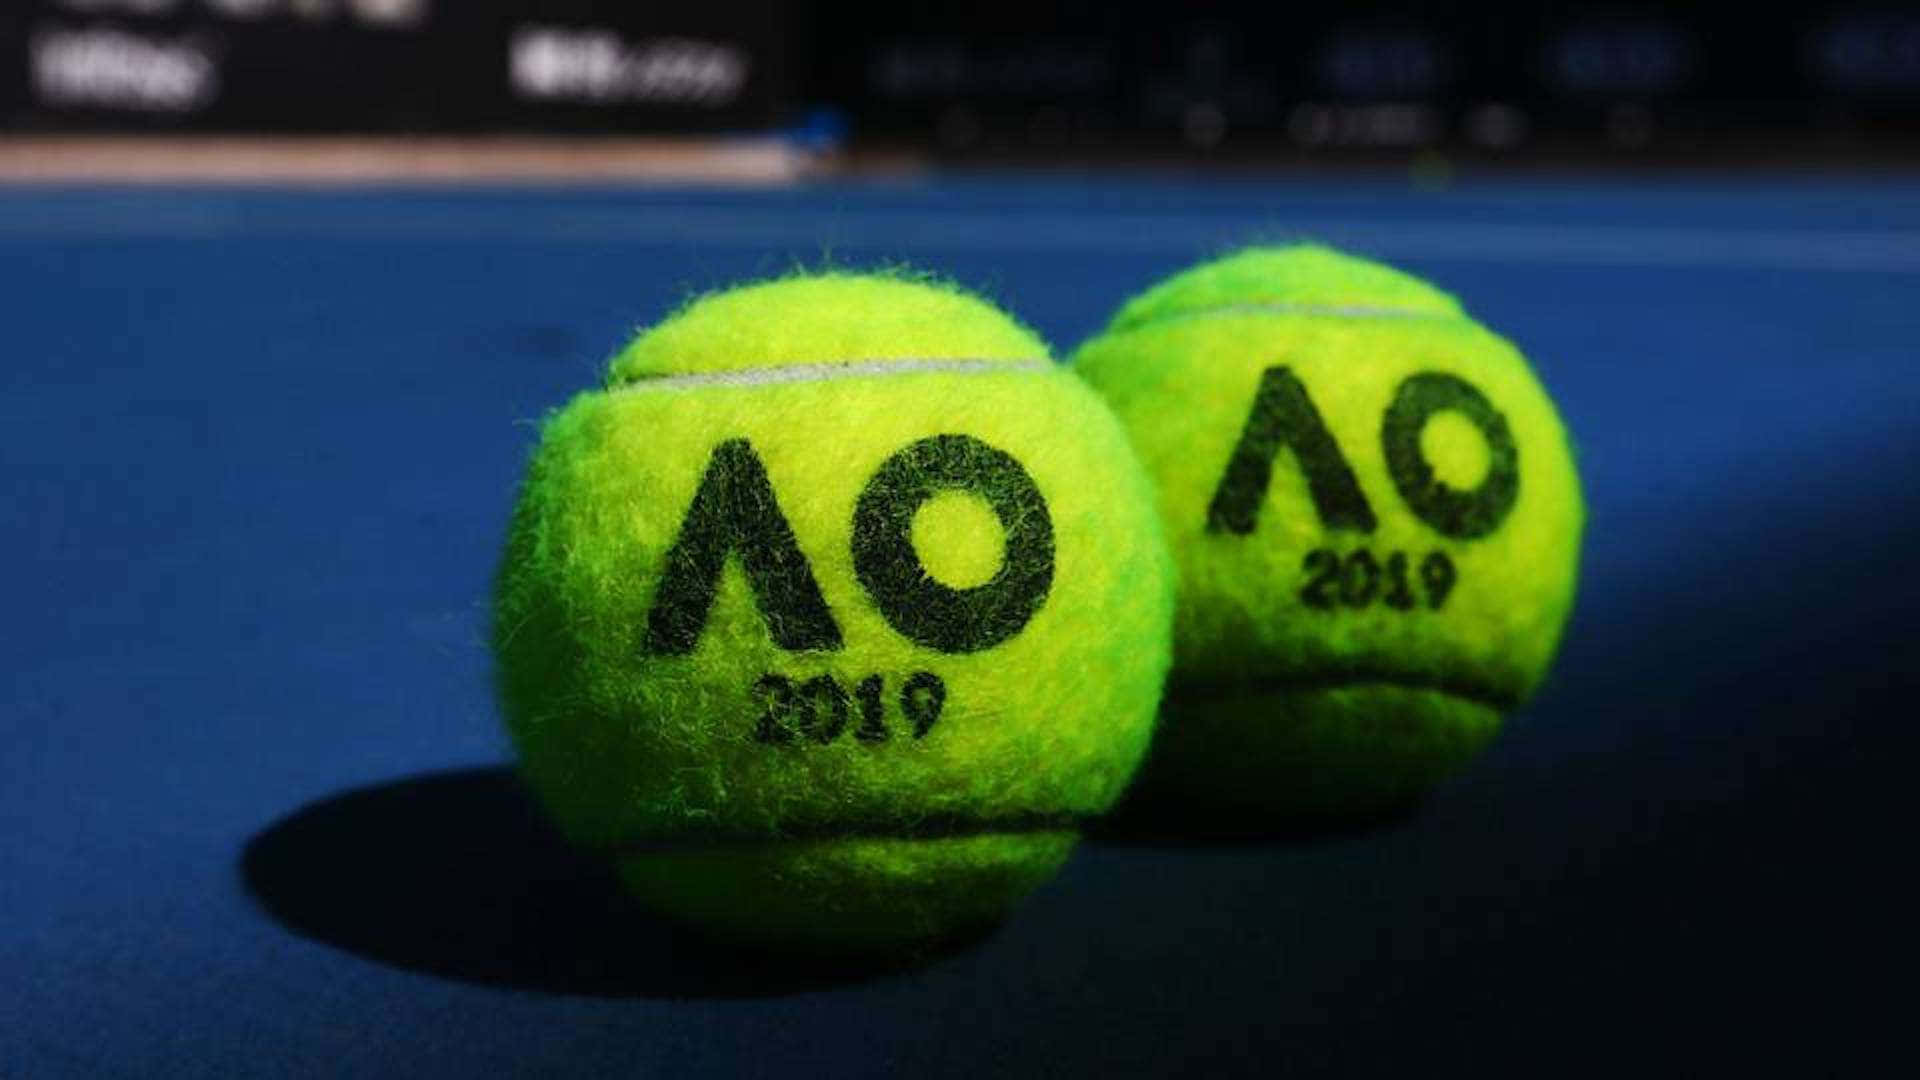 Welcome to the Australian Open, an Elite Grand Slam Tennis Event